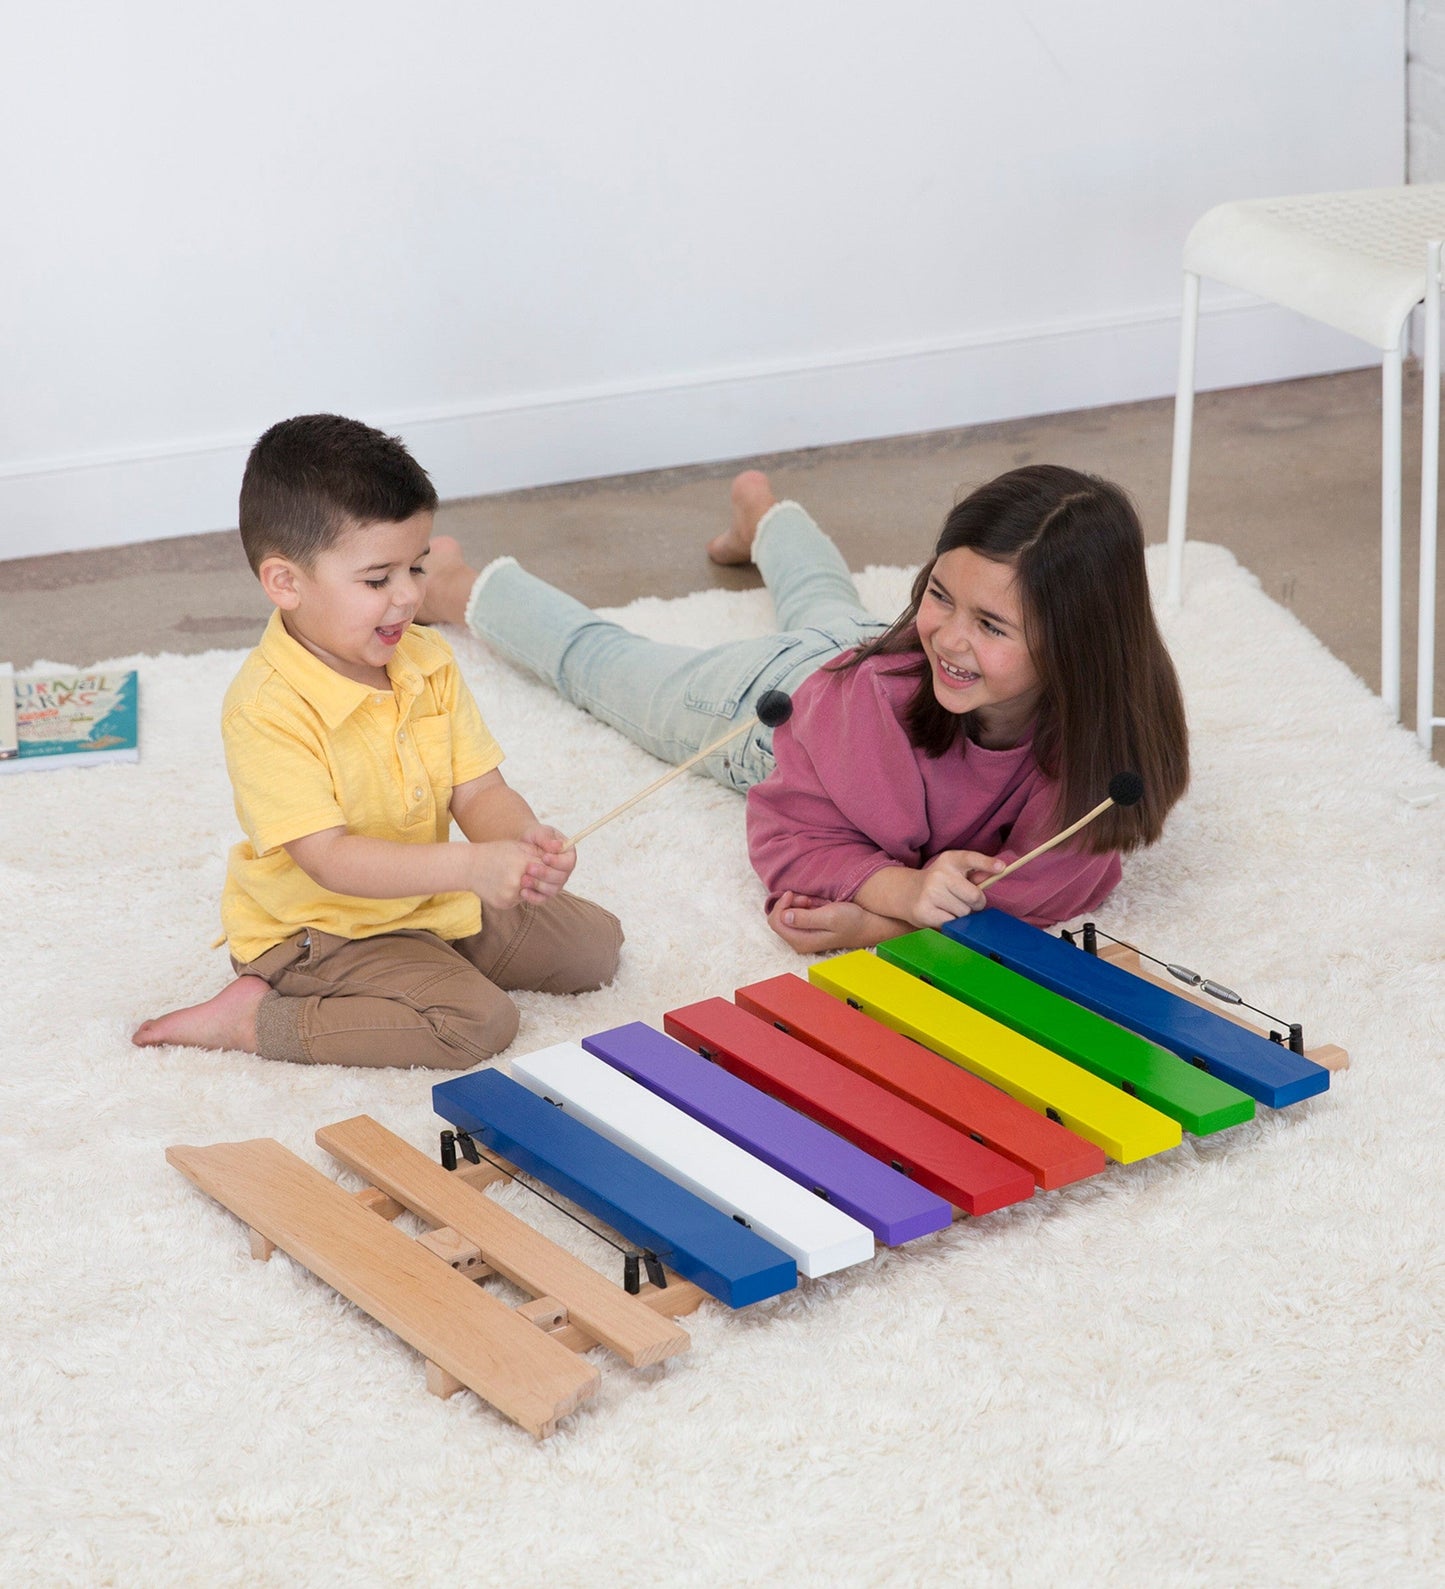 Jumbo 3-Foot Colorful Wooden Chime Xylophone